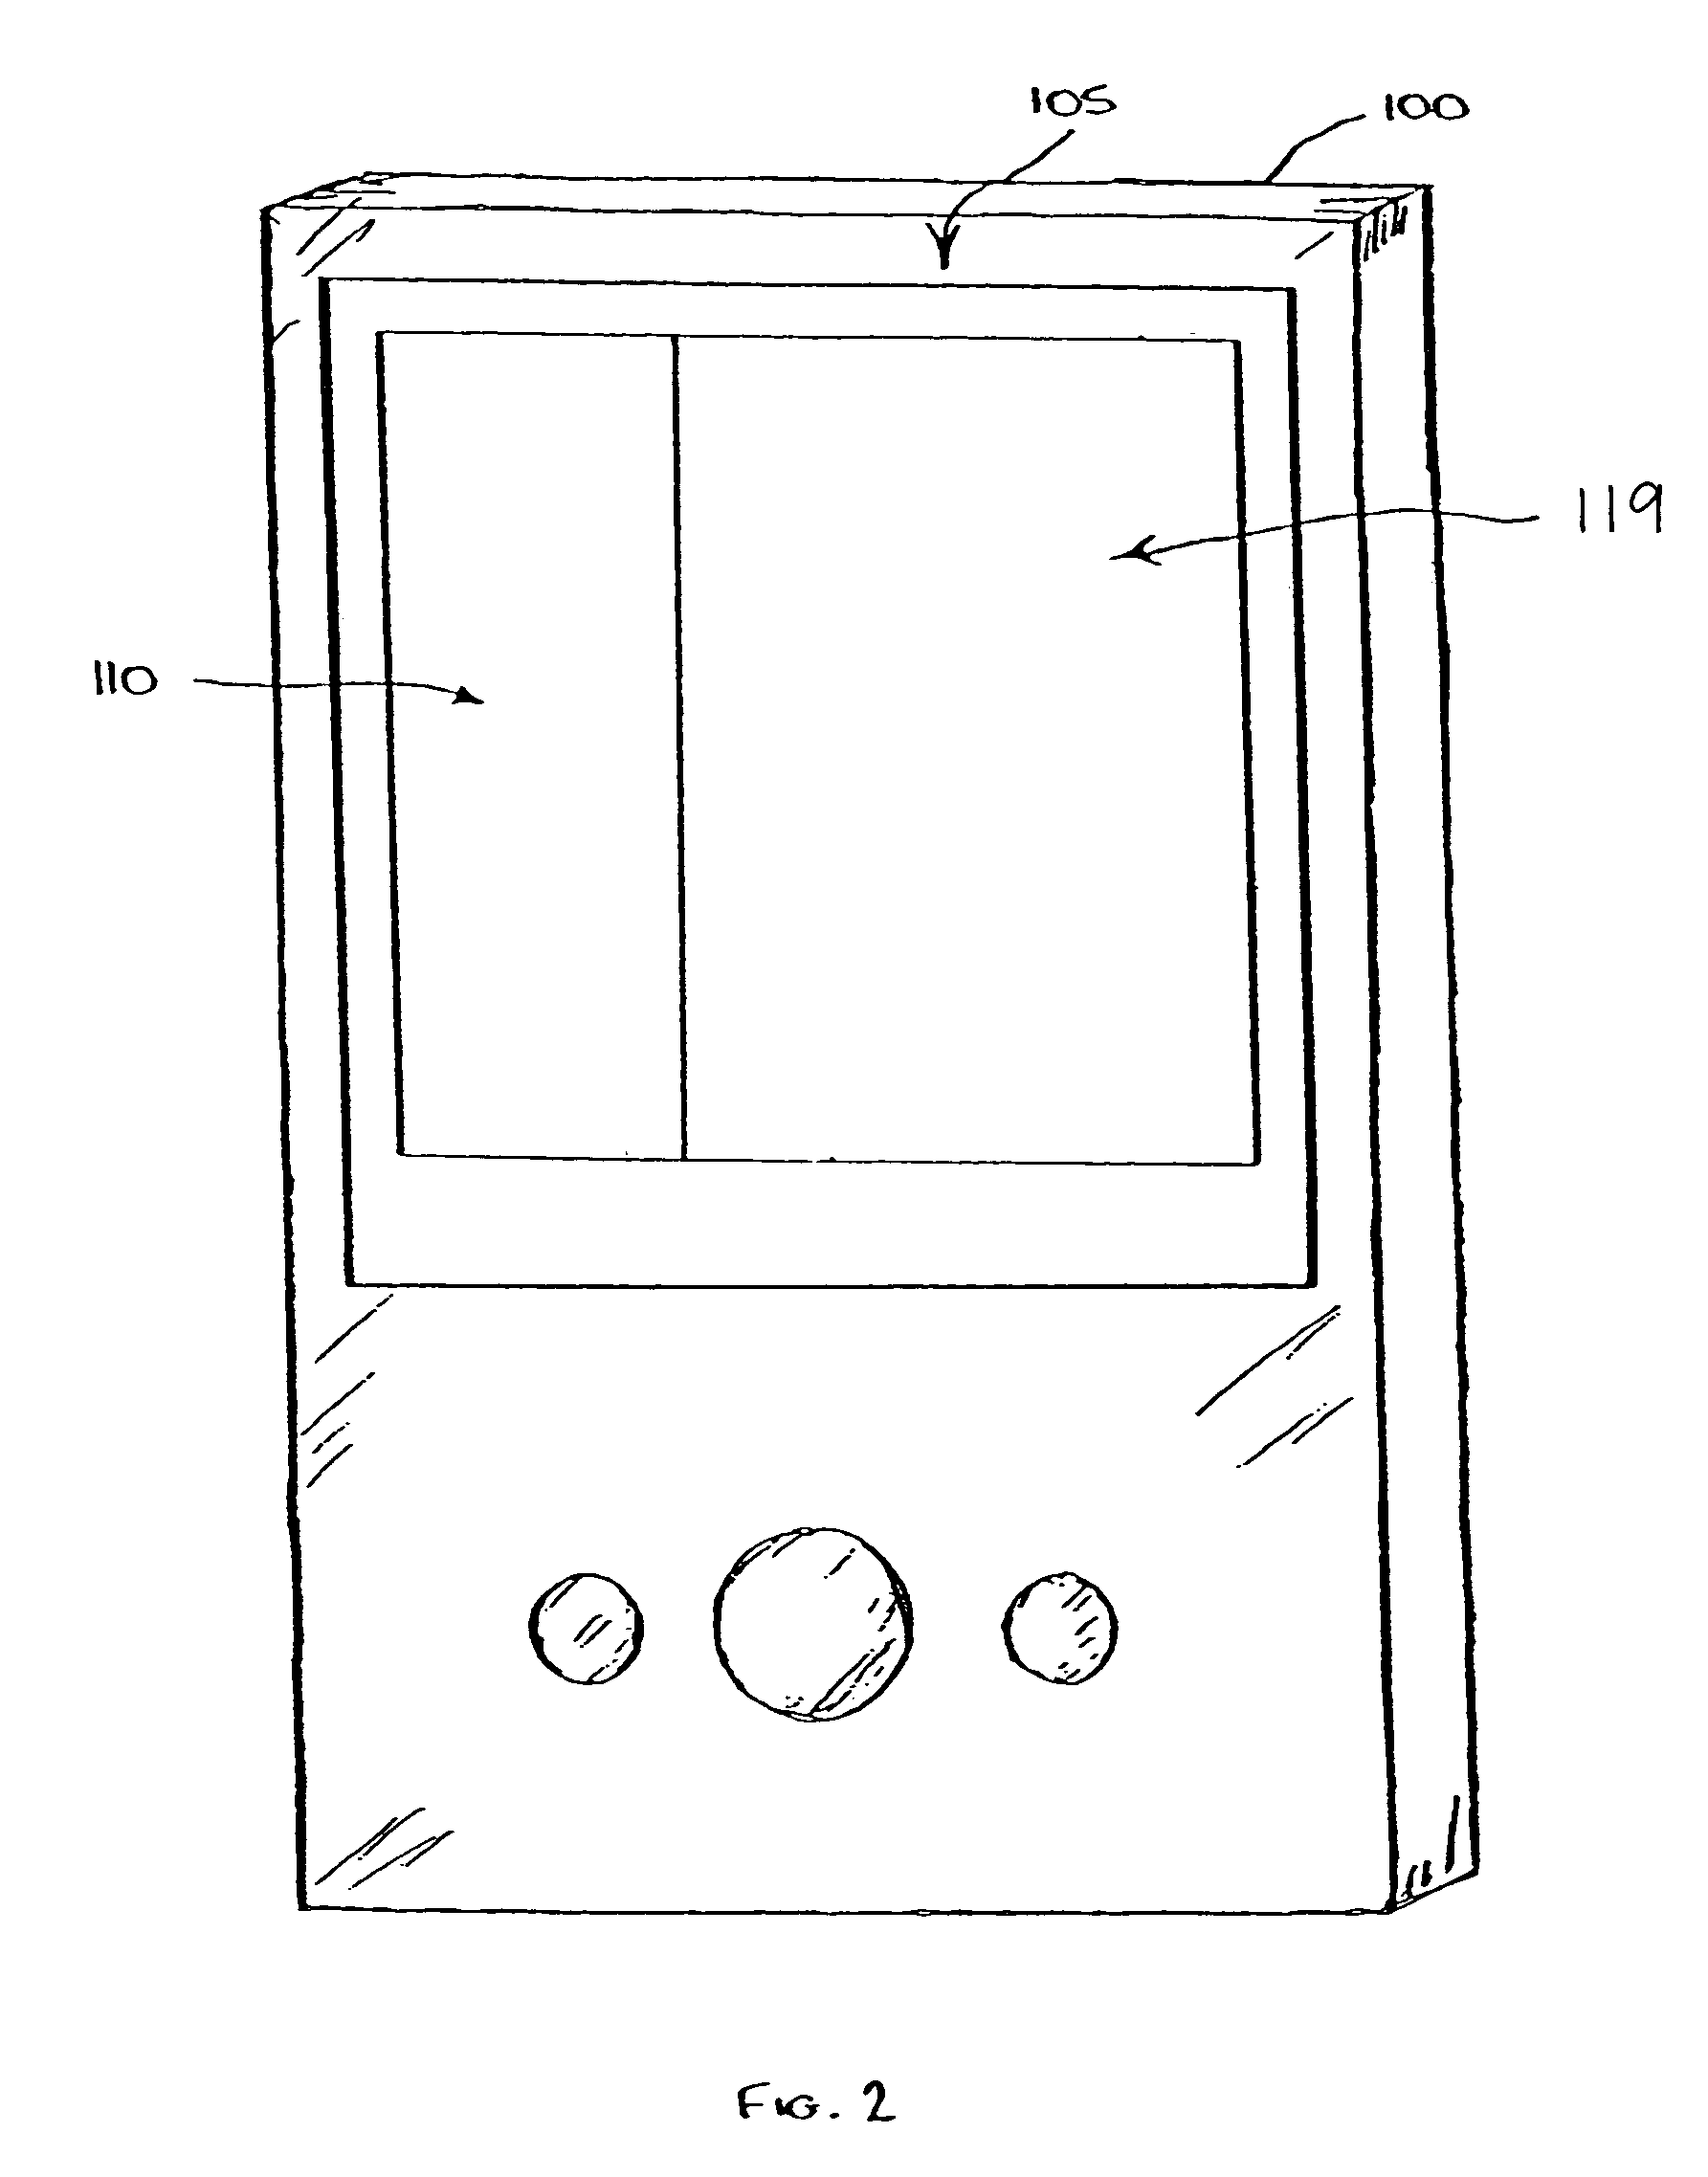 System and method for data input